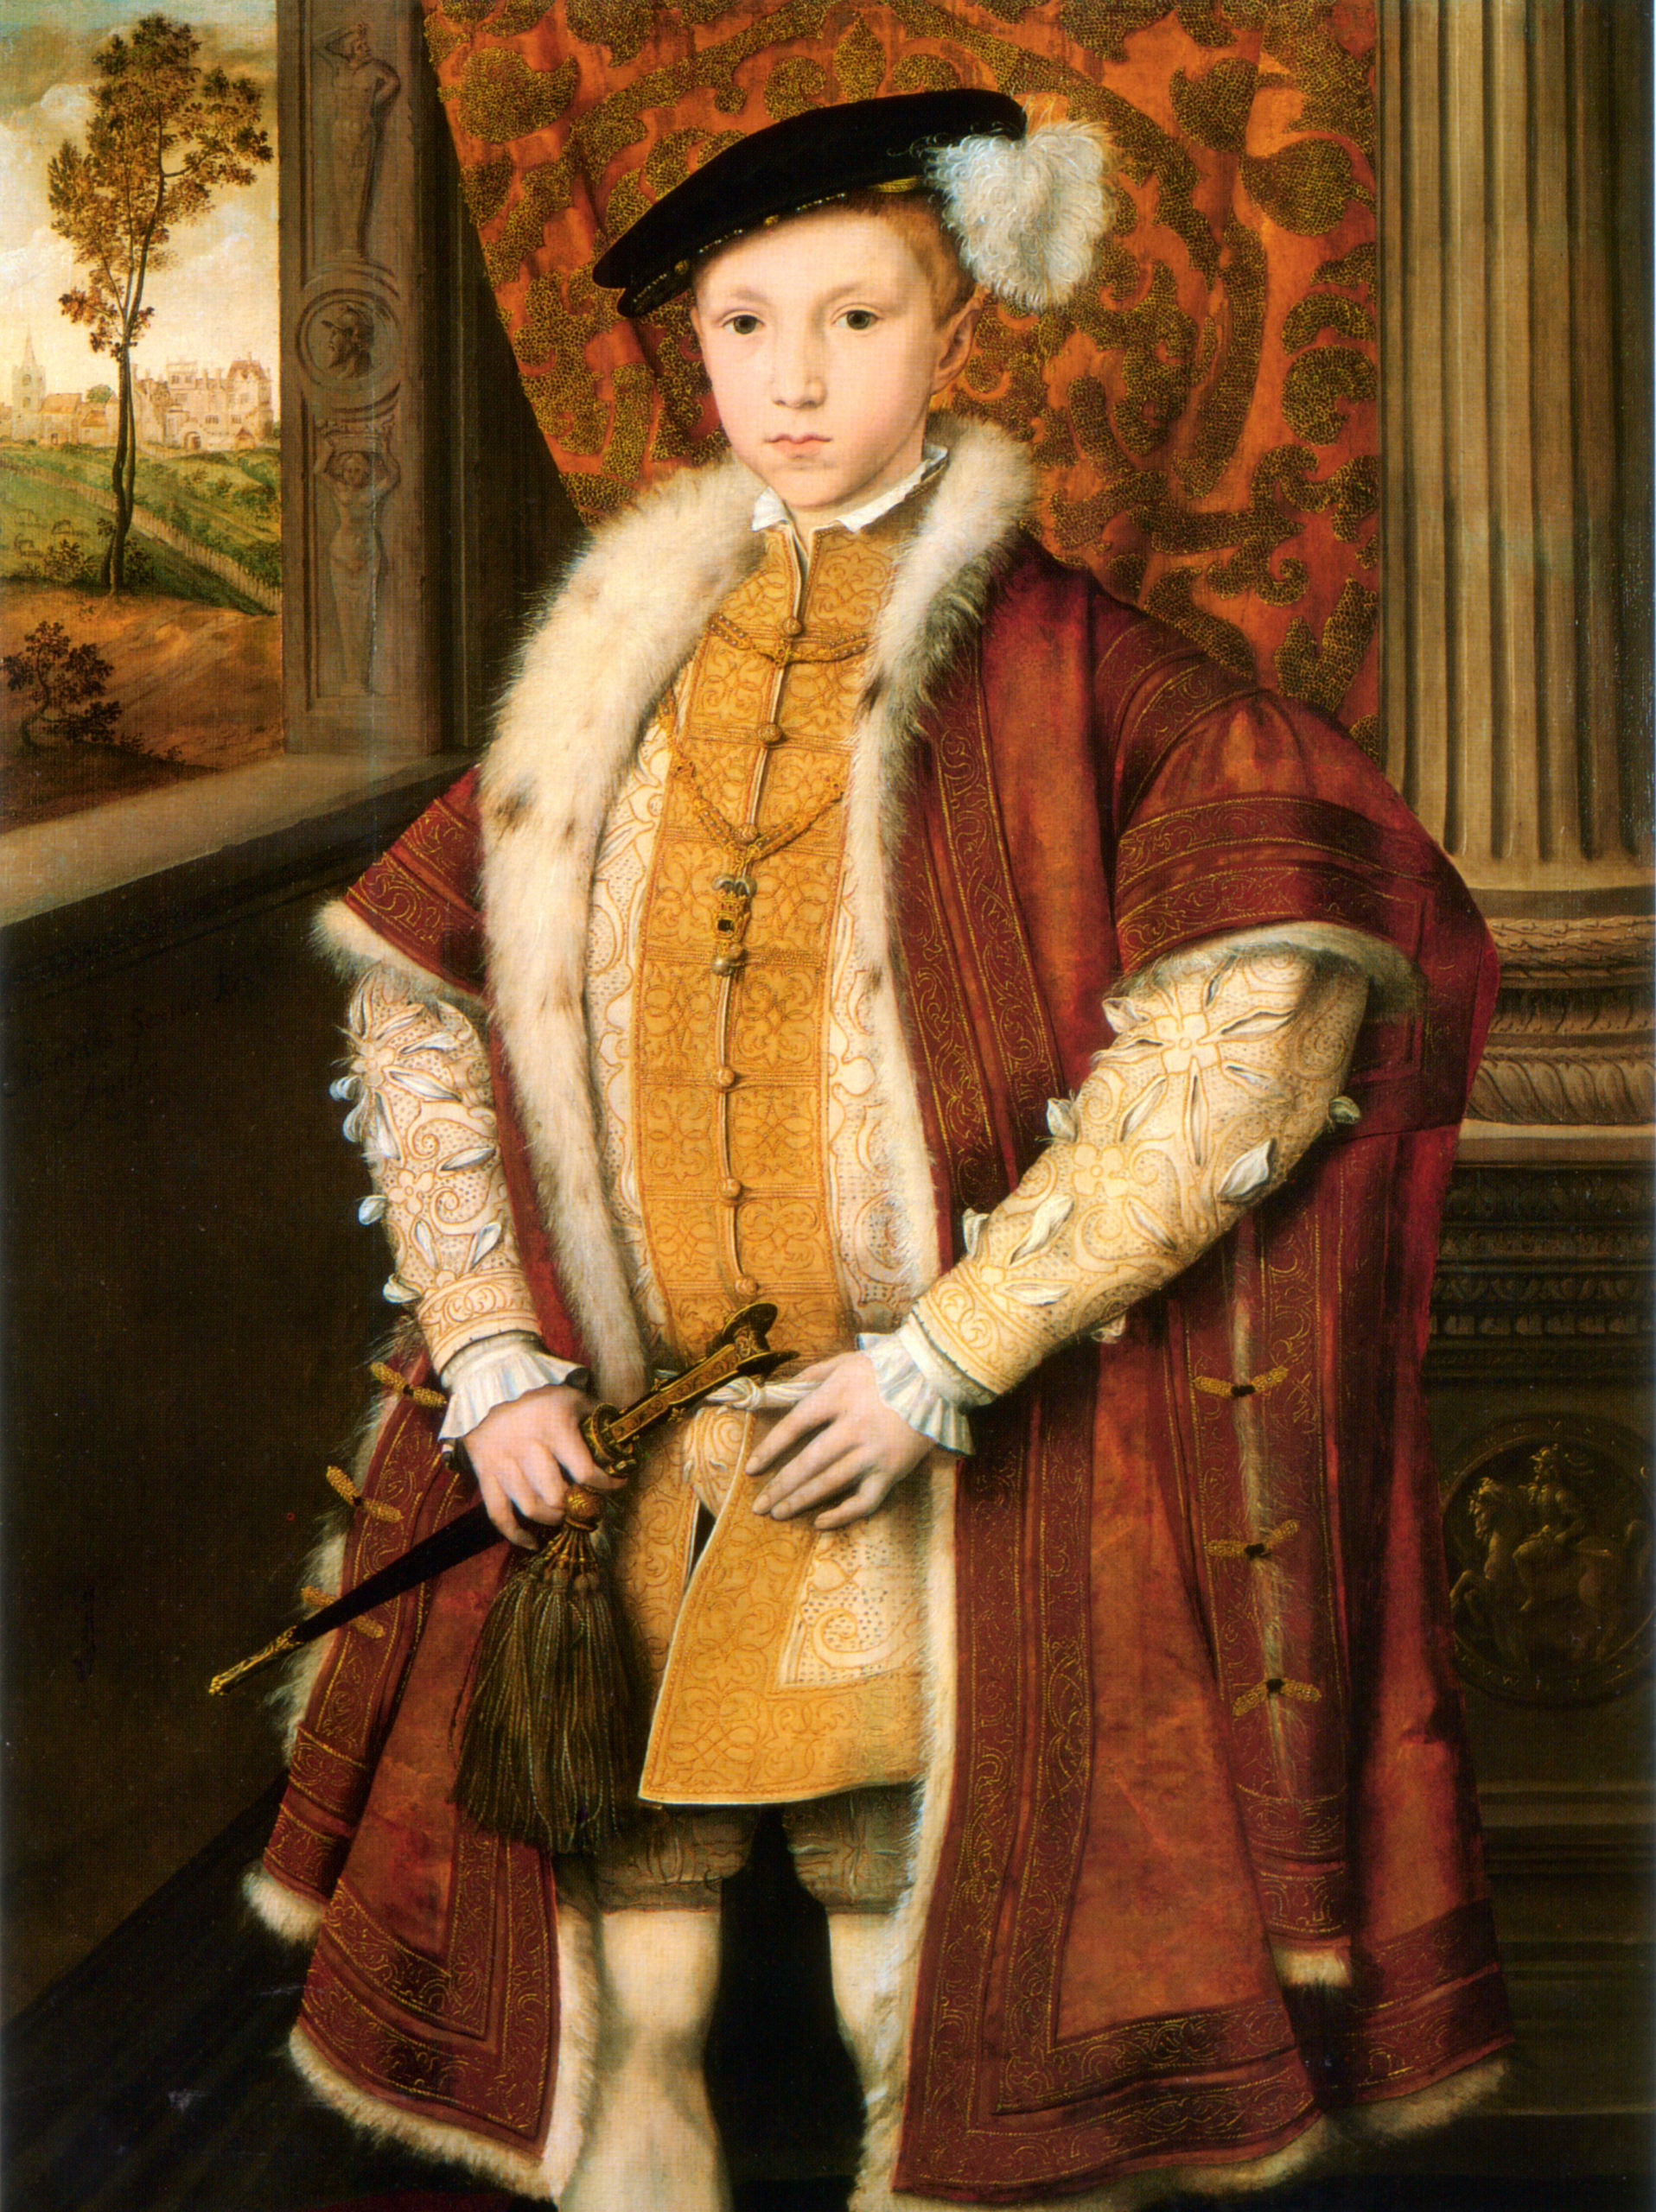 February 20, 1546 - Edward VI crowned King. Only nine, his reign was limited by the powers of his uncle, Lord Protector. Read more on www.janetwertman.com